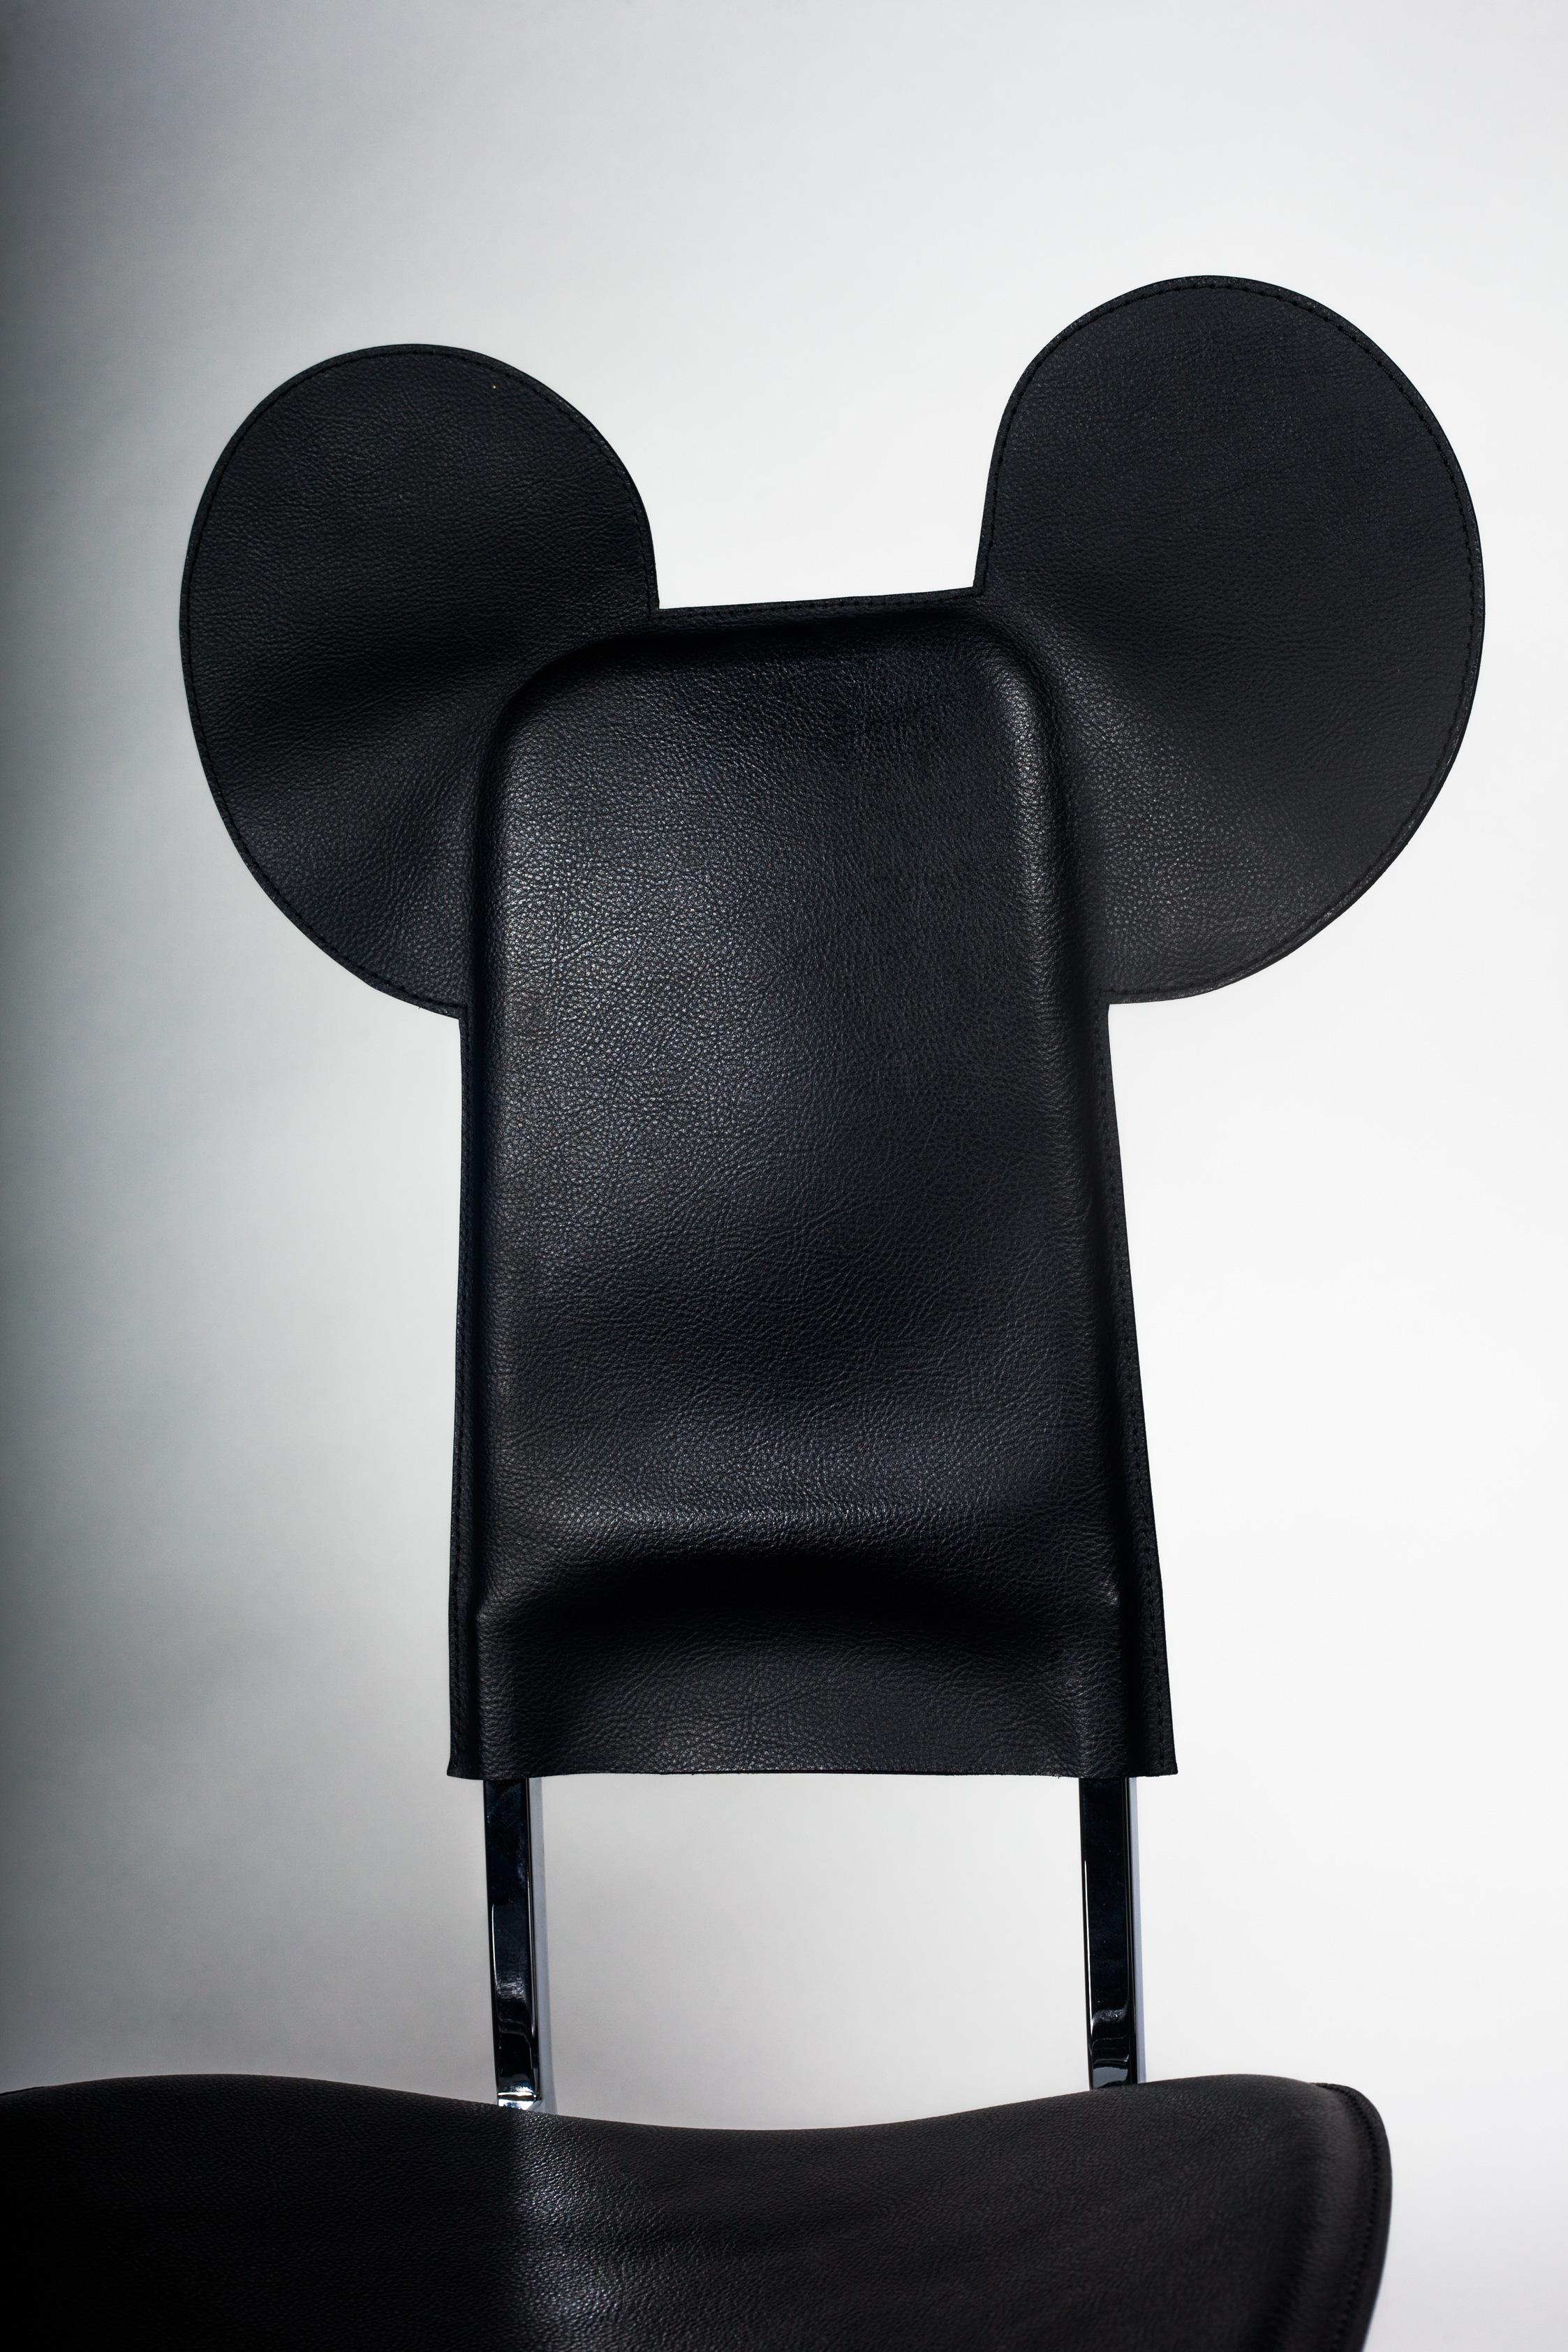 Post-Modern Memphis Mickey Mouse Chair by Javier Mariscal, 